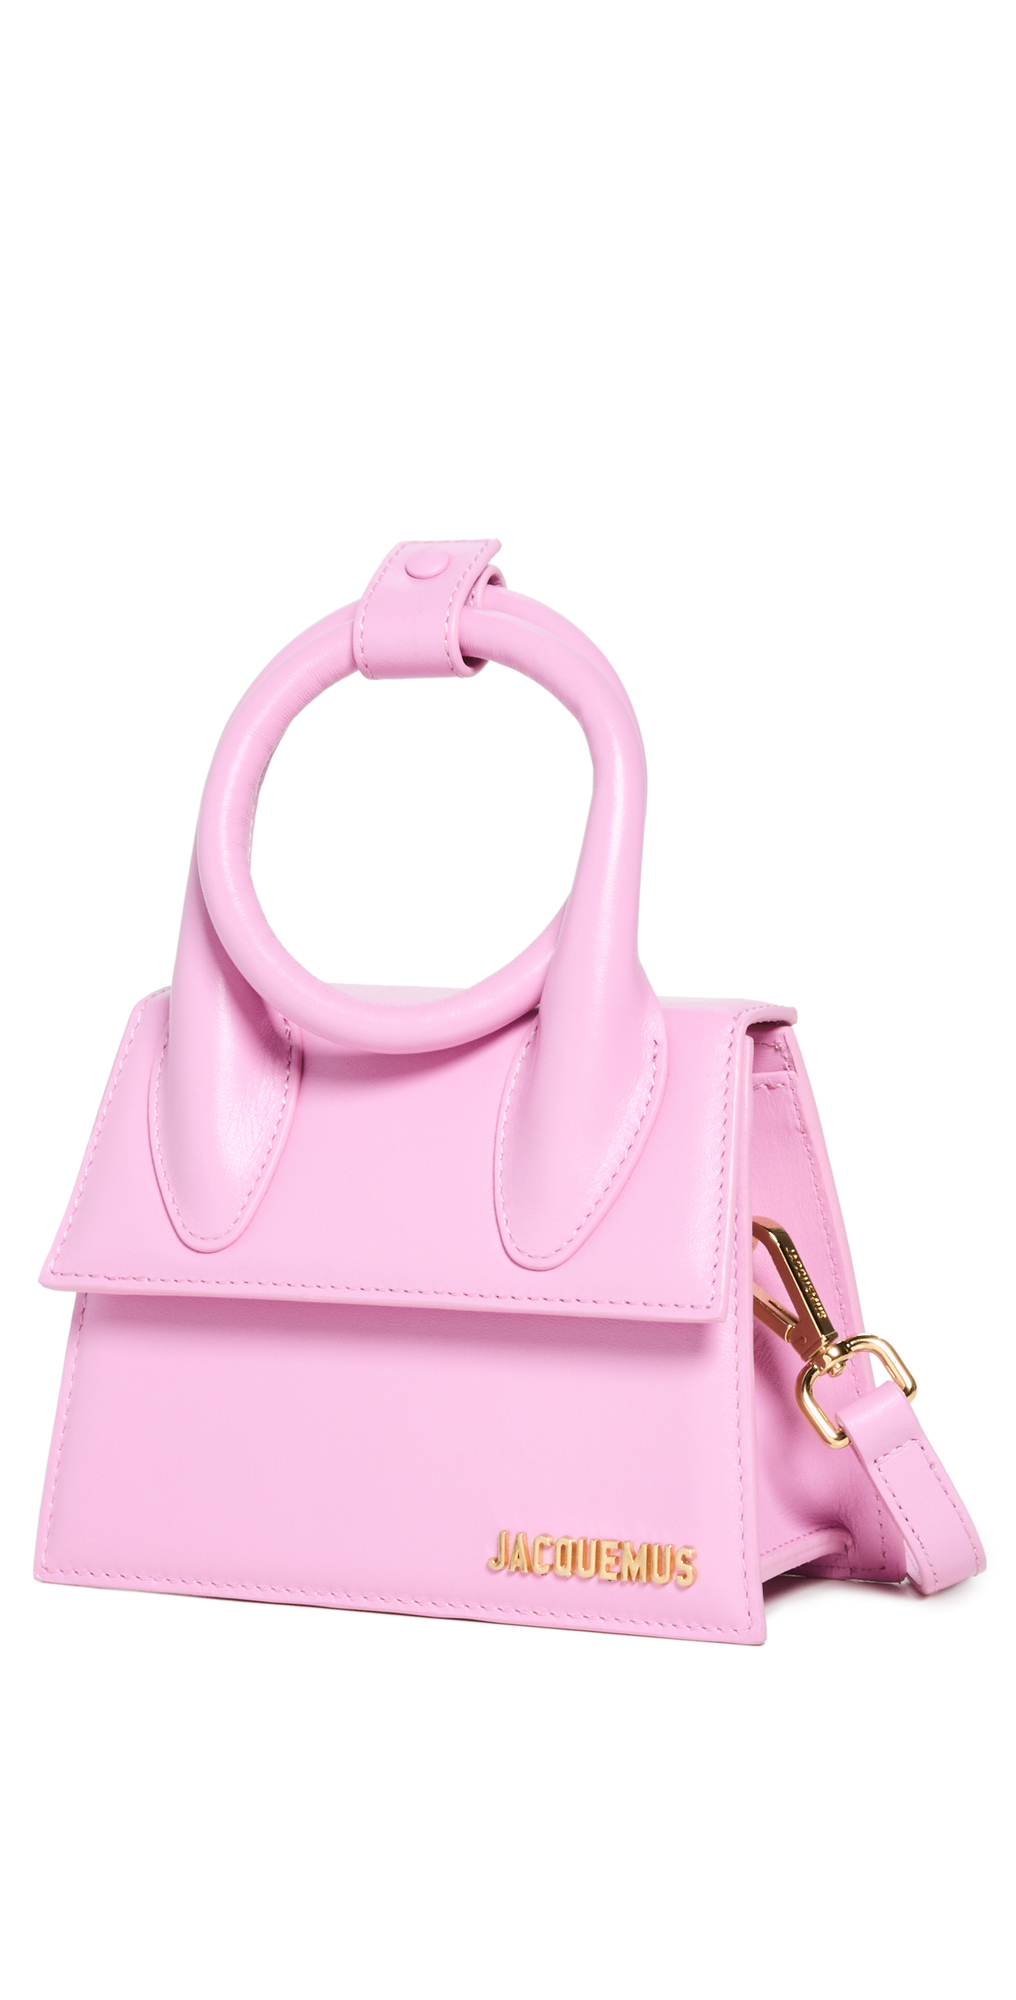 Jacquemus Le Chiquito Noeud Satchel in pink